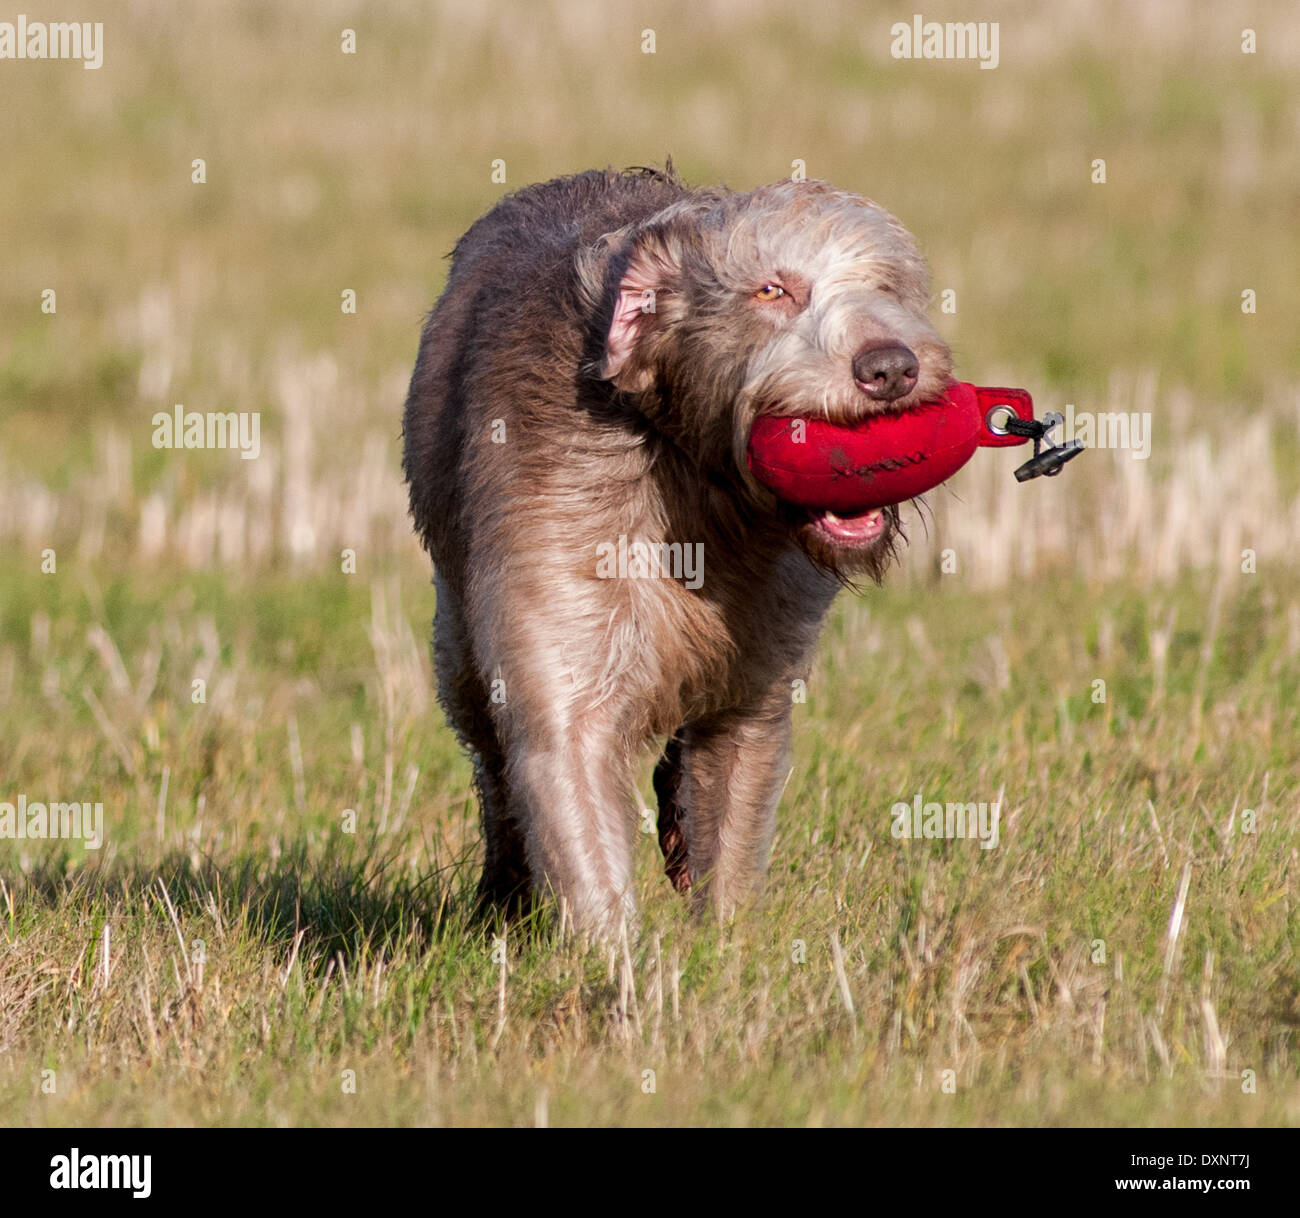 A  Slovak Wirehaired Pointer, or Slovakian Rough-haired Pointer dog, during a dog training lesson carrying a dummy Stock Photo